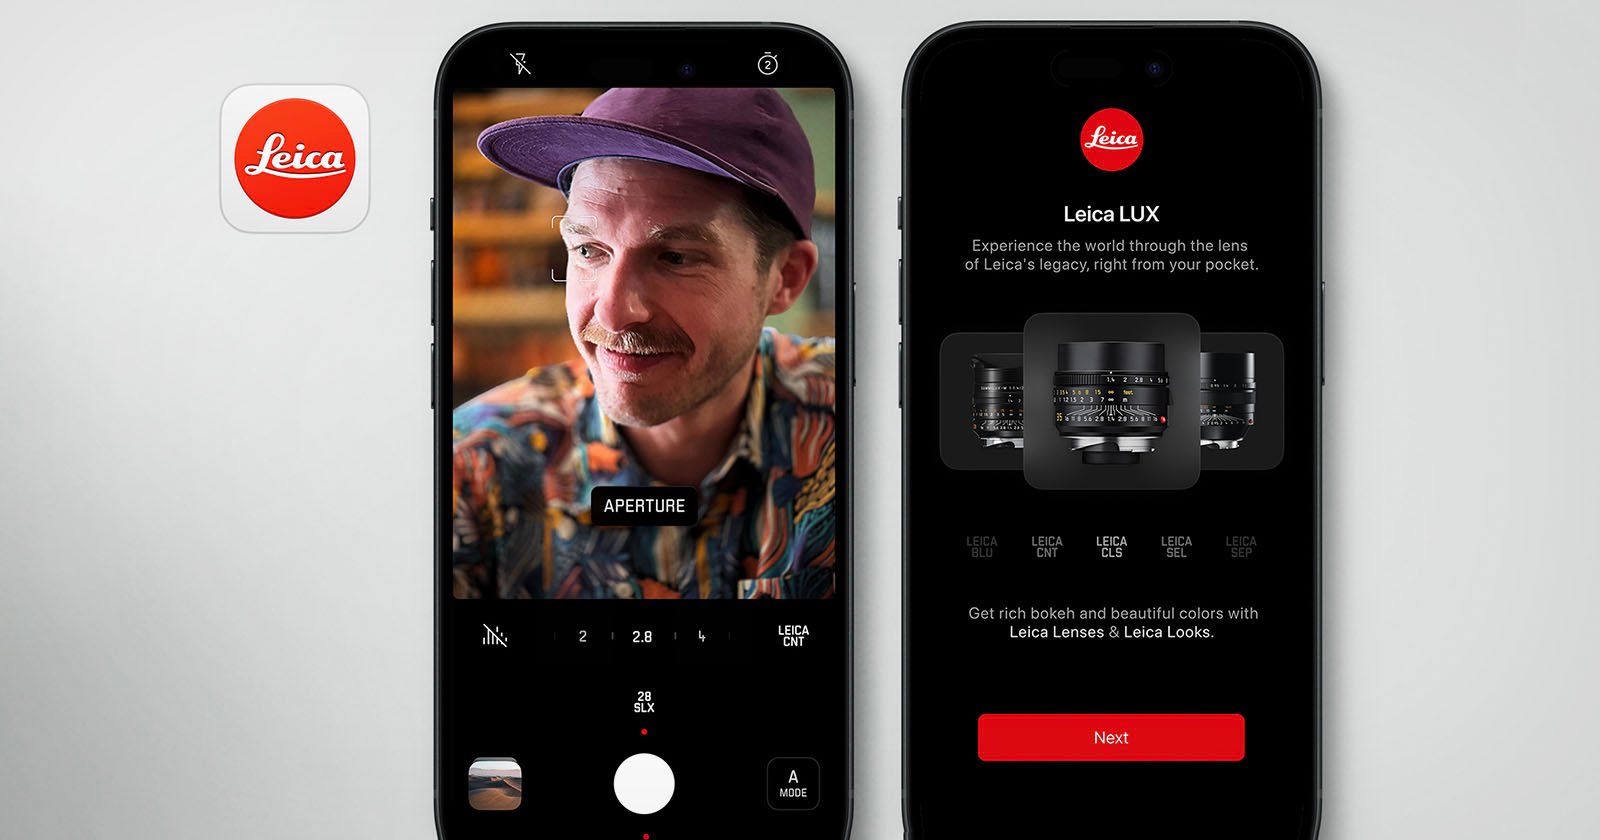 Two smartphones display different screens. The left phone shows a camera app capturing a man wearing a purple cap. The right phone displays a Leica advertisement for Leica LUX lenses and Leica Looks, with a red Next button at the bottom and the Leica logo at the top.